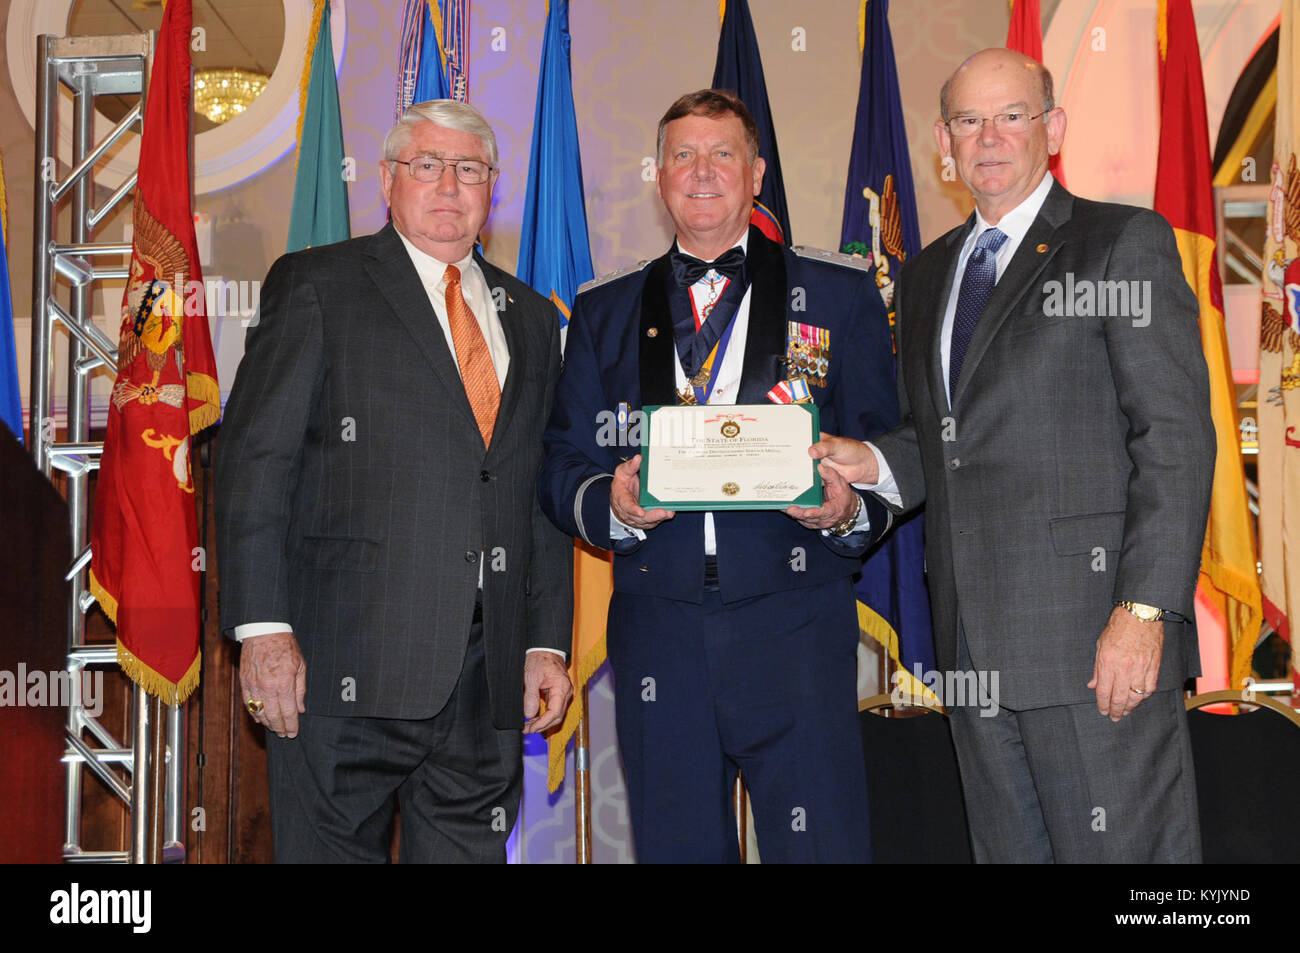 The Kentucky National Guard and distinguished guests honored Maj. Gen. Edward Tonini during a retirement ceremony held at the Galt House in Louisville, Ky, November 21, 2015 Stock Photo